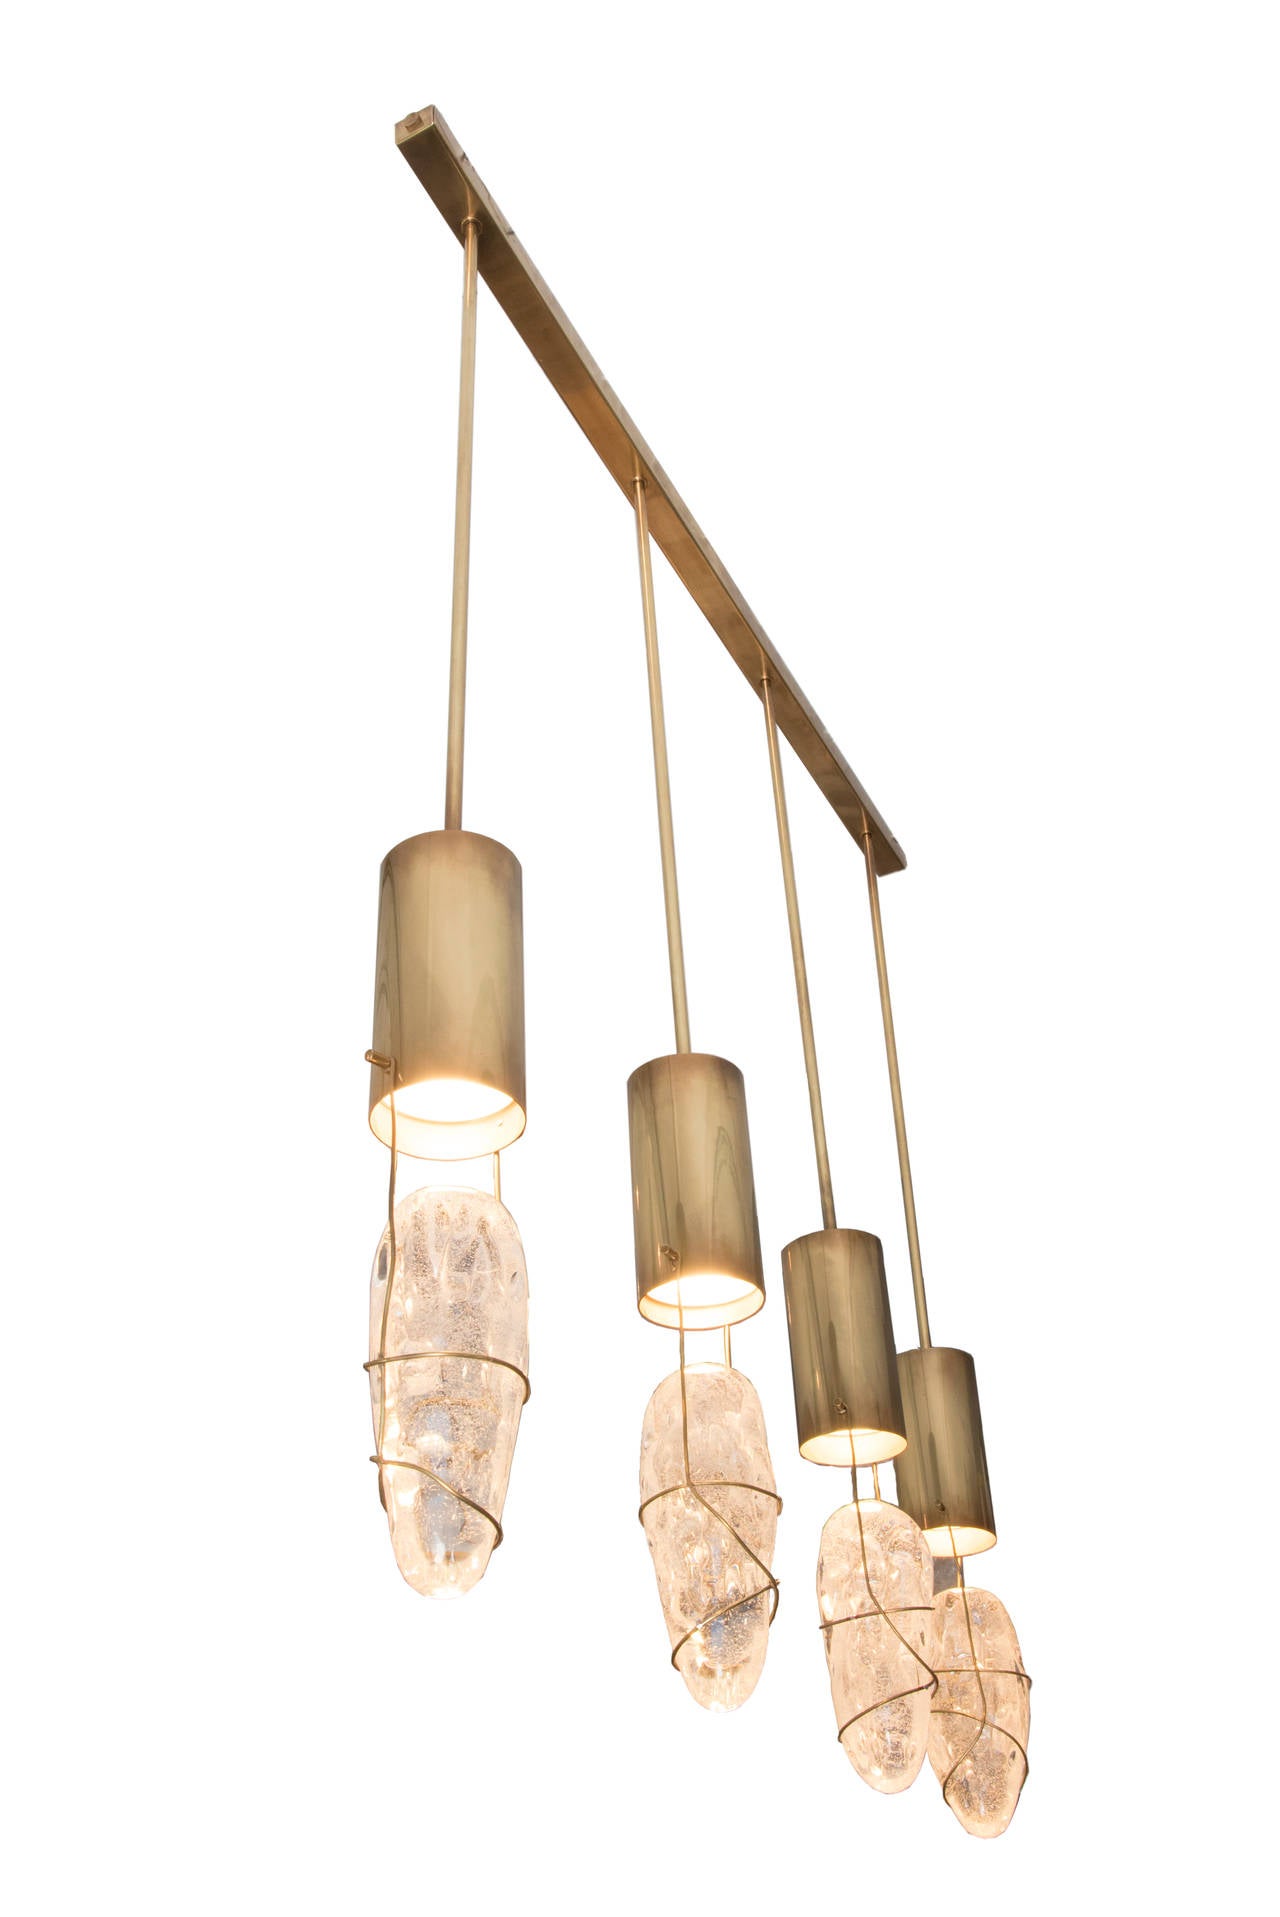 Pendants by Angelo Brotto, four glass lights,
Edition Esperia,
gold brass and glass,
circa 1990, Italy.

Dimensions: Height 130 cm, length 110 cm, diameter of the lamp 11 cm.

Angelo Brotto (1914 - 2002) is an Italian artist and designer recognized